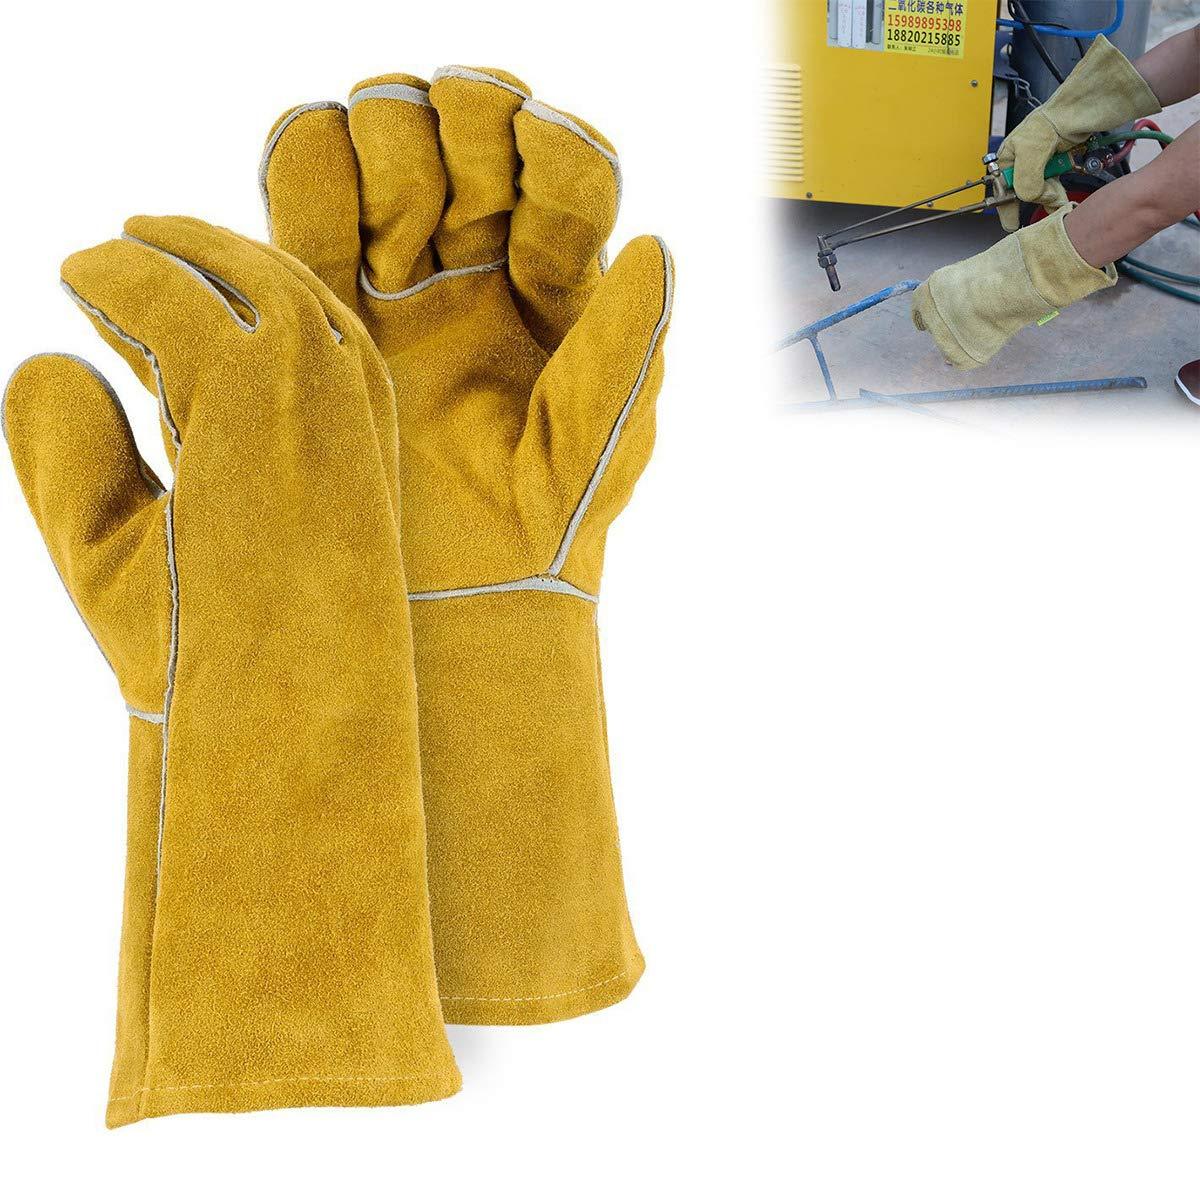 0716 Protective Durable Heat Resistant Welding Gloves - SkyShopy